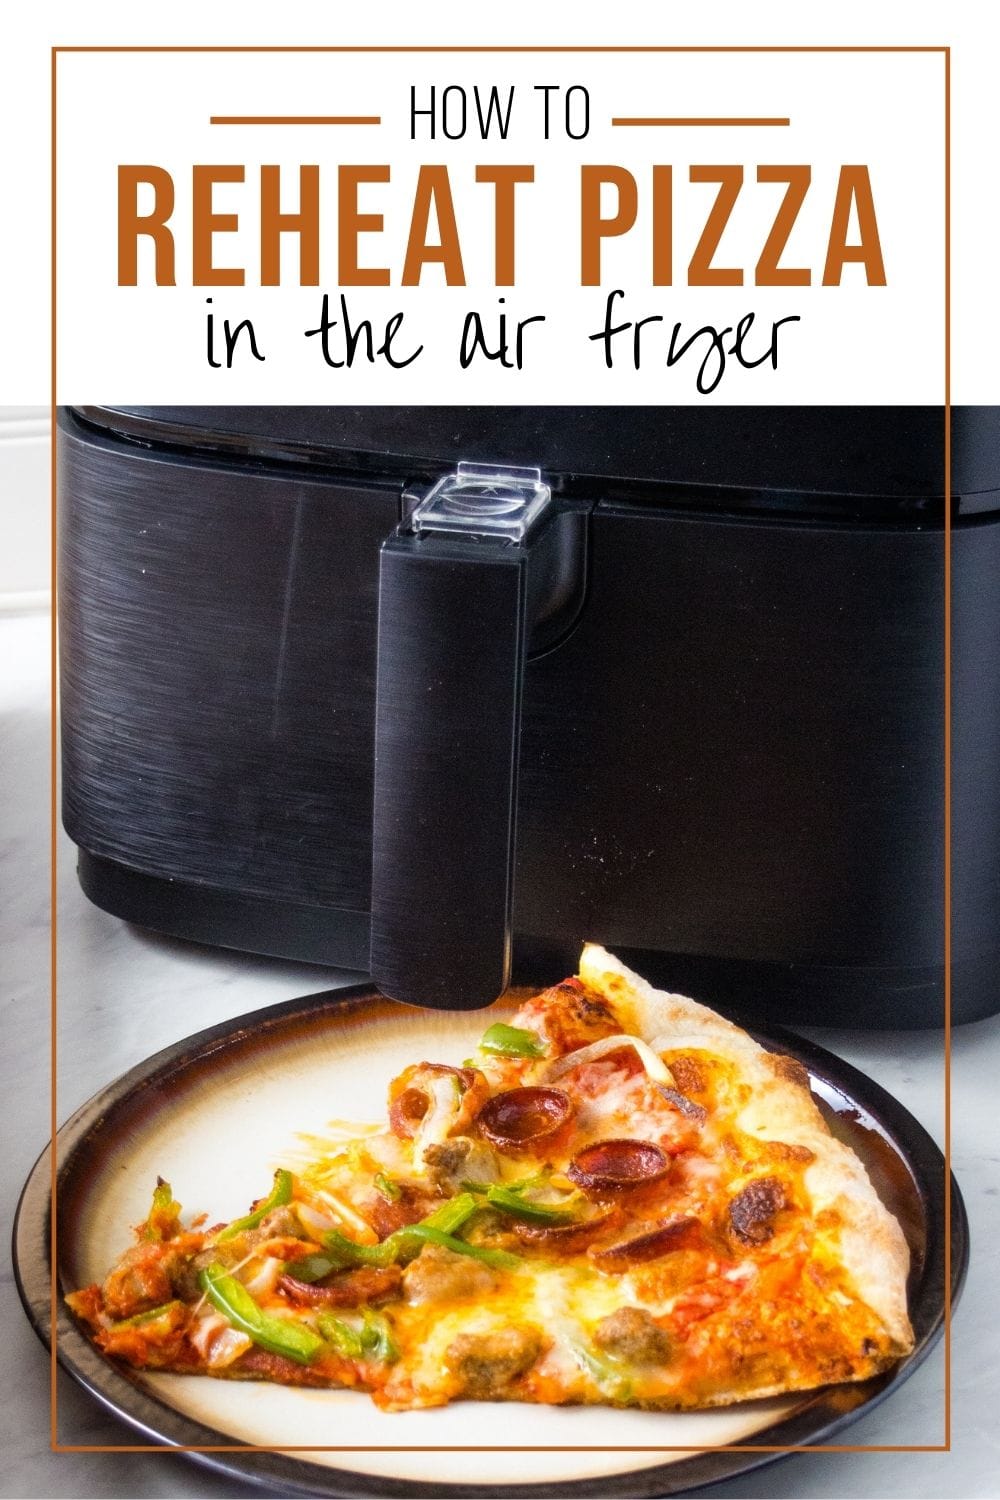 Air Fryer Pizza Recipe - How to Make Air Fryer Pizza